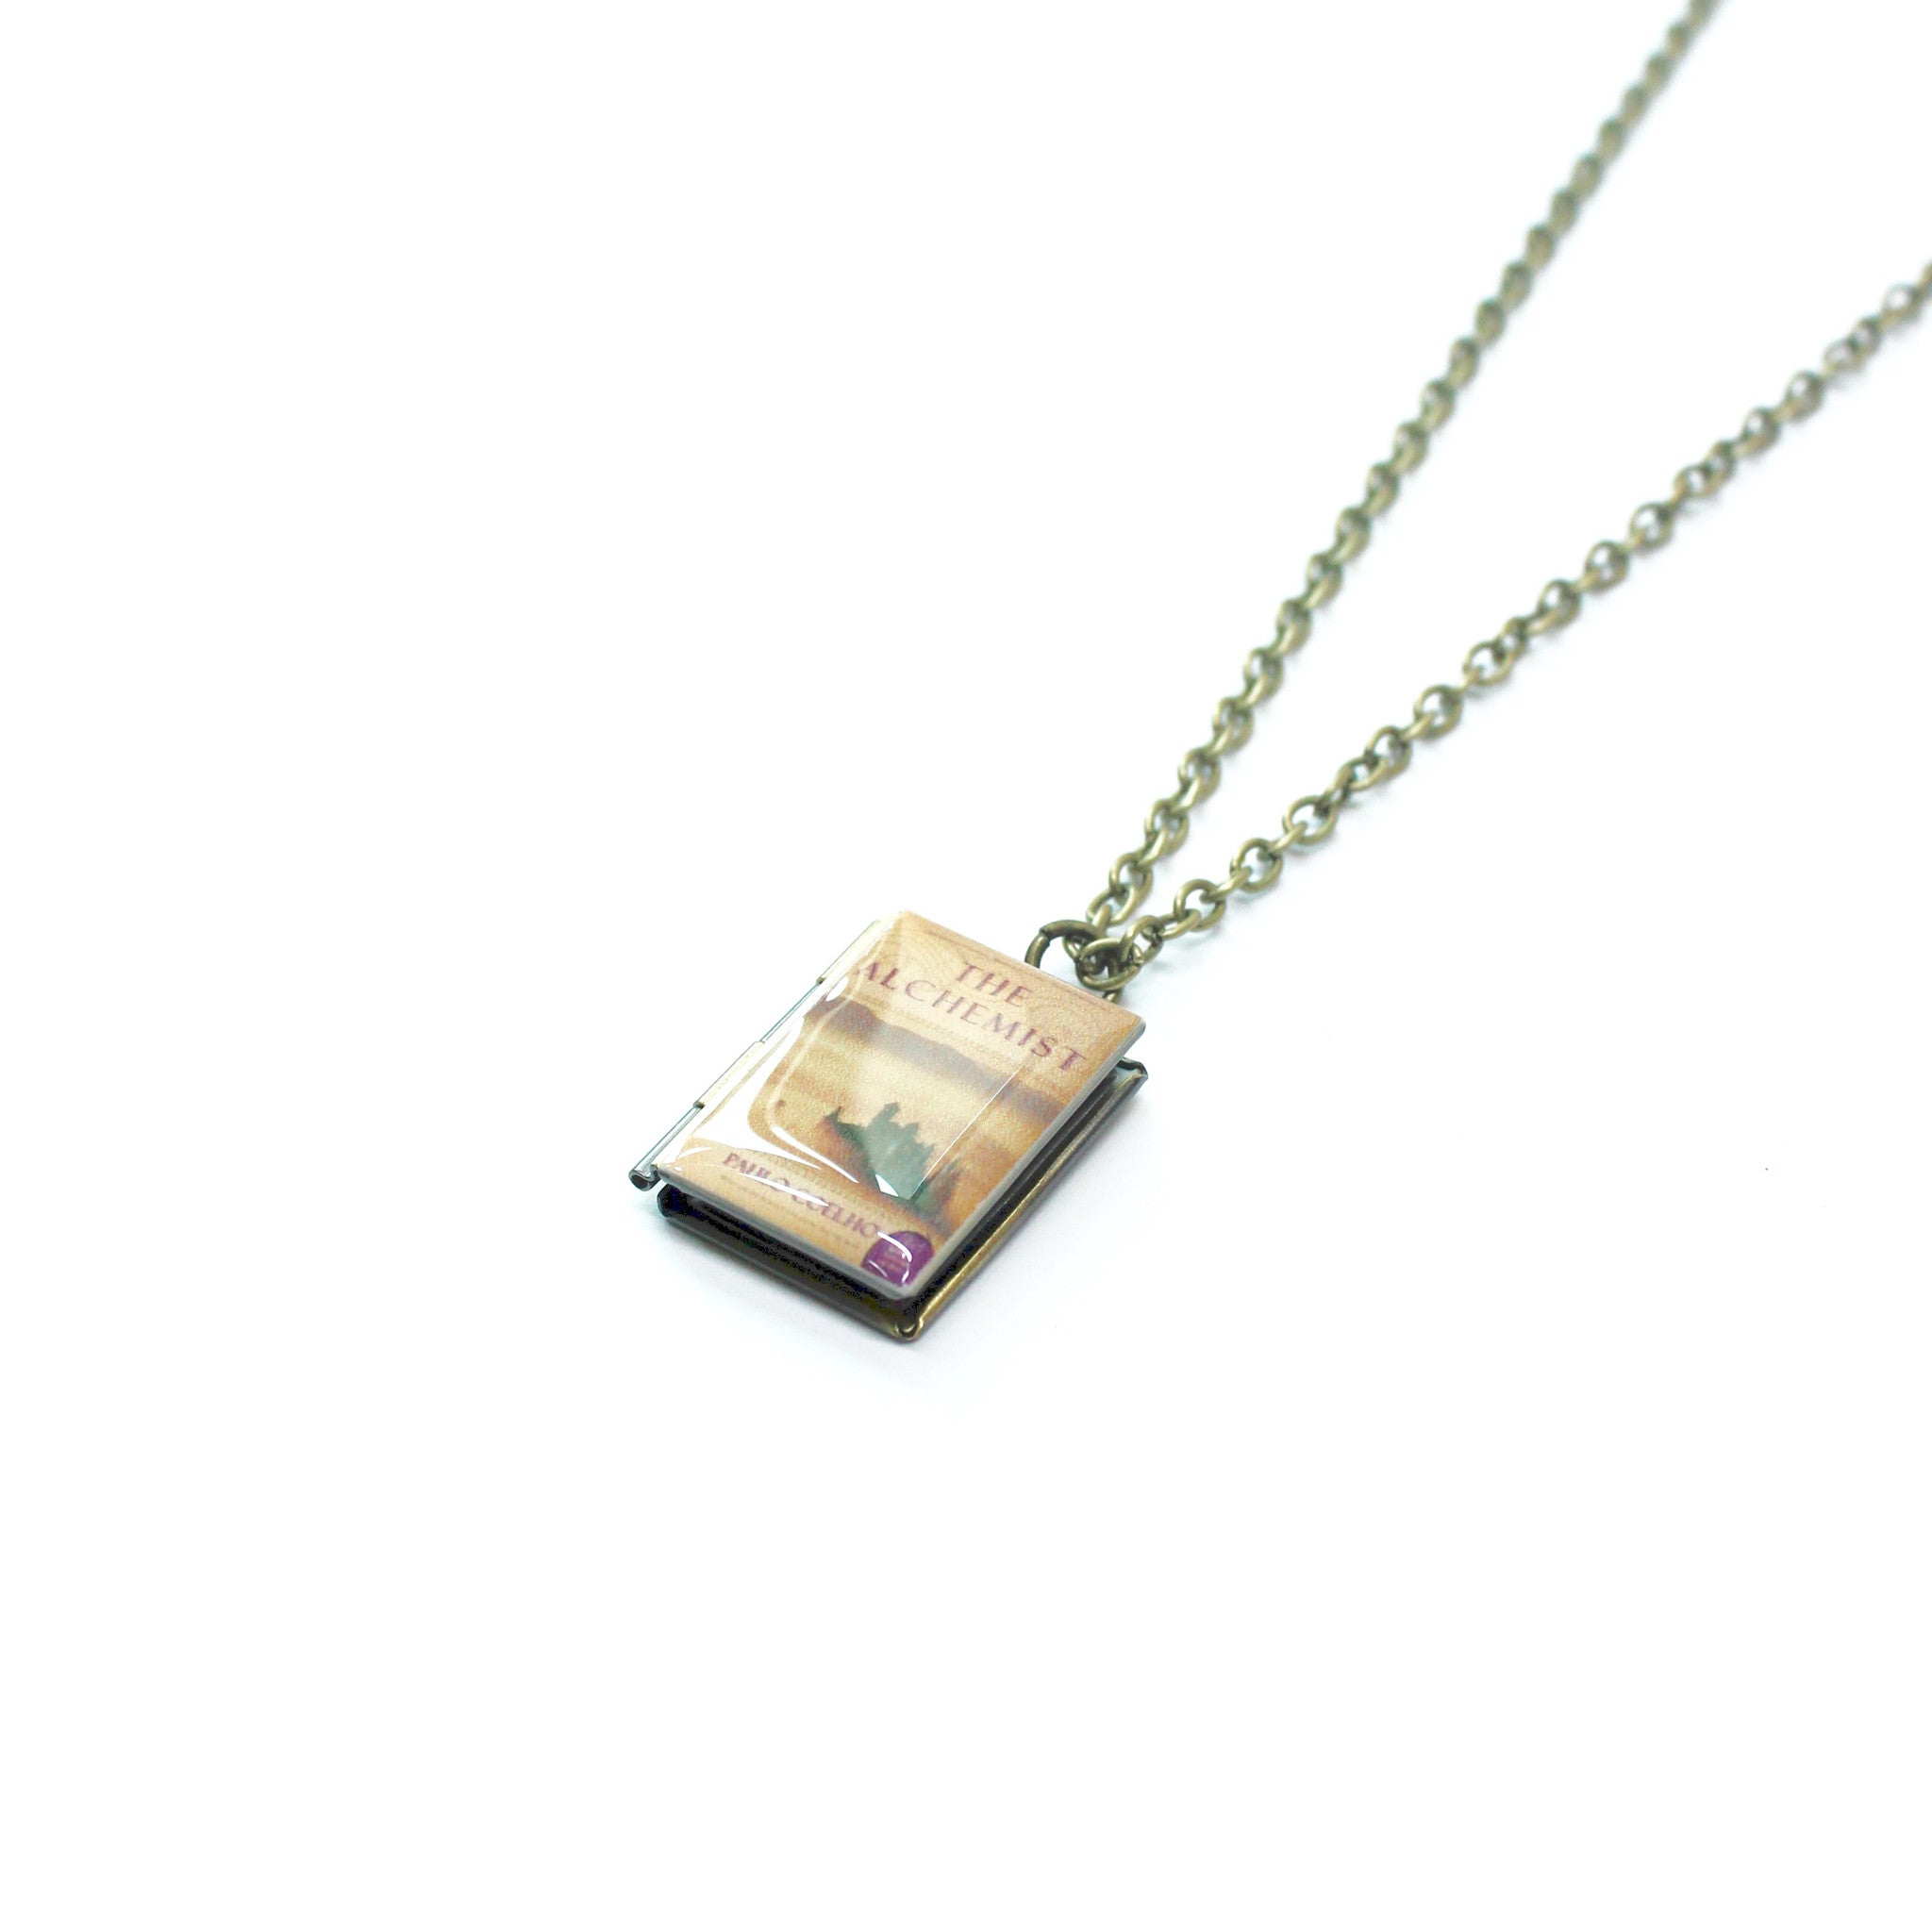 Women Book Friend Jewelry Square Shaped Necklace Photo Picture Locket  Pendant at Rs 1379.00 | C P Tank | Mumbai| ID: 2851665690730